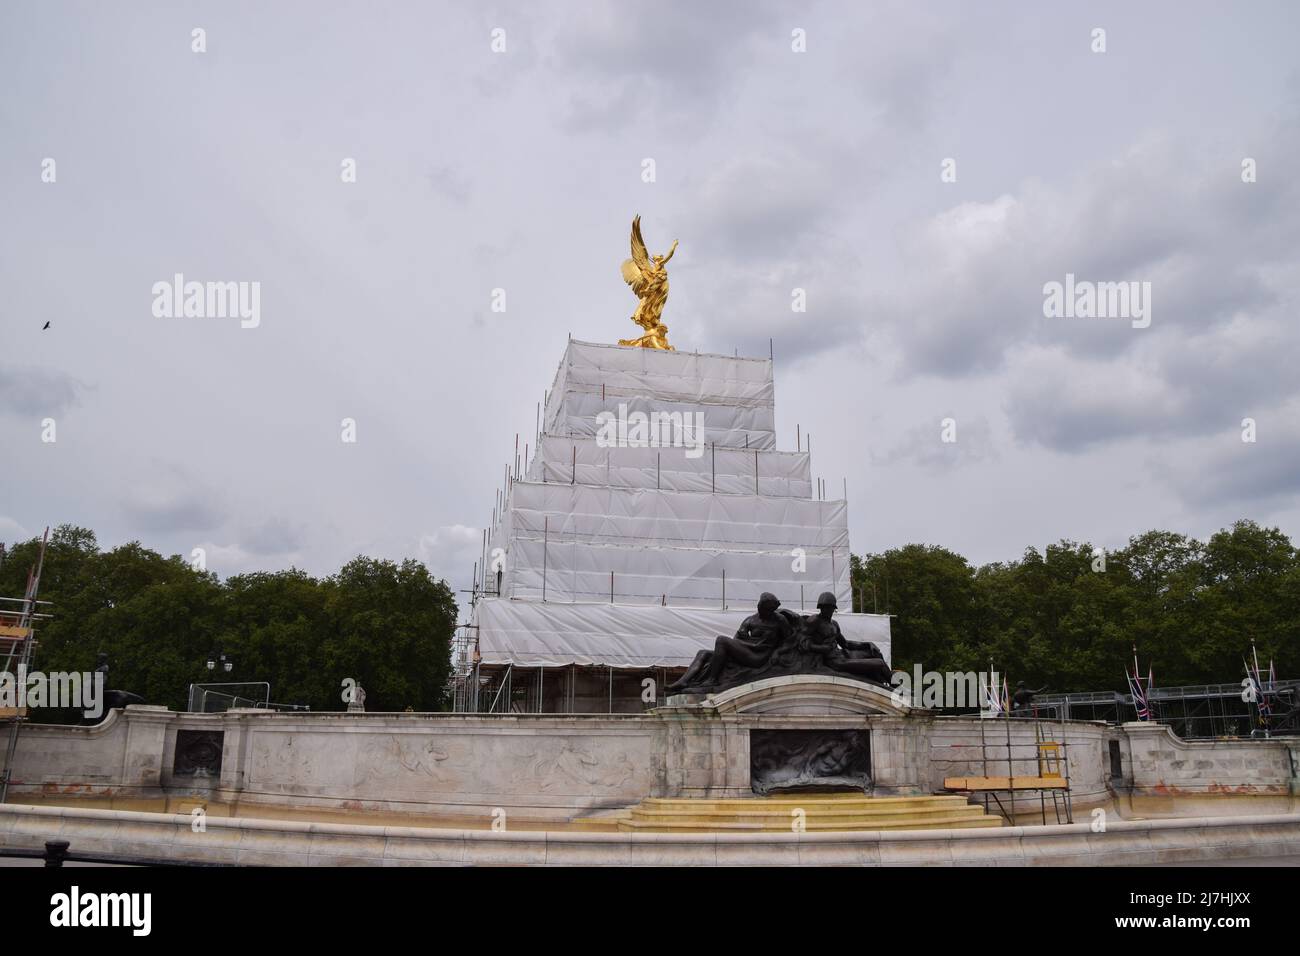 London, UK. 9th May 2022. Preparations are under way around Buckingham Palace for the Queen's Platinum Jubilee, marking the 70th anniversary of the Queen's accession to the throne. A special extended Platinum Jubilee Weekend will take place 2nd-5th June.   Credit: Vuk Valcic/Alamy Live News Stock Photo